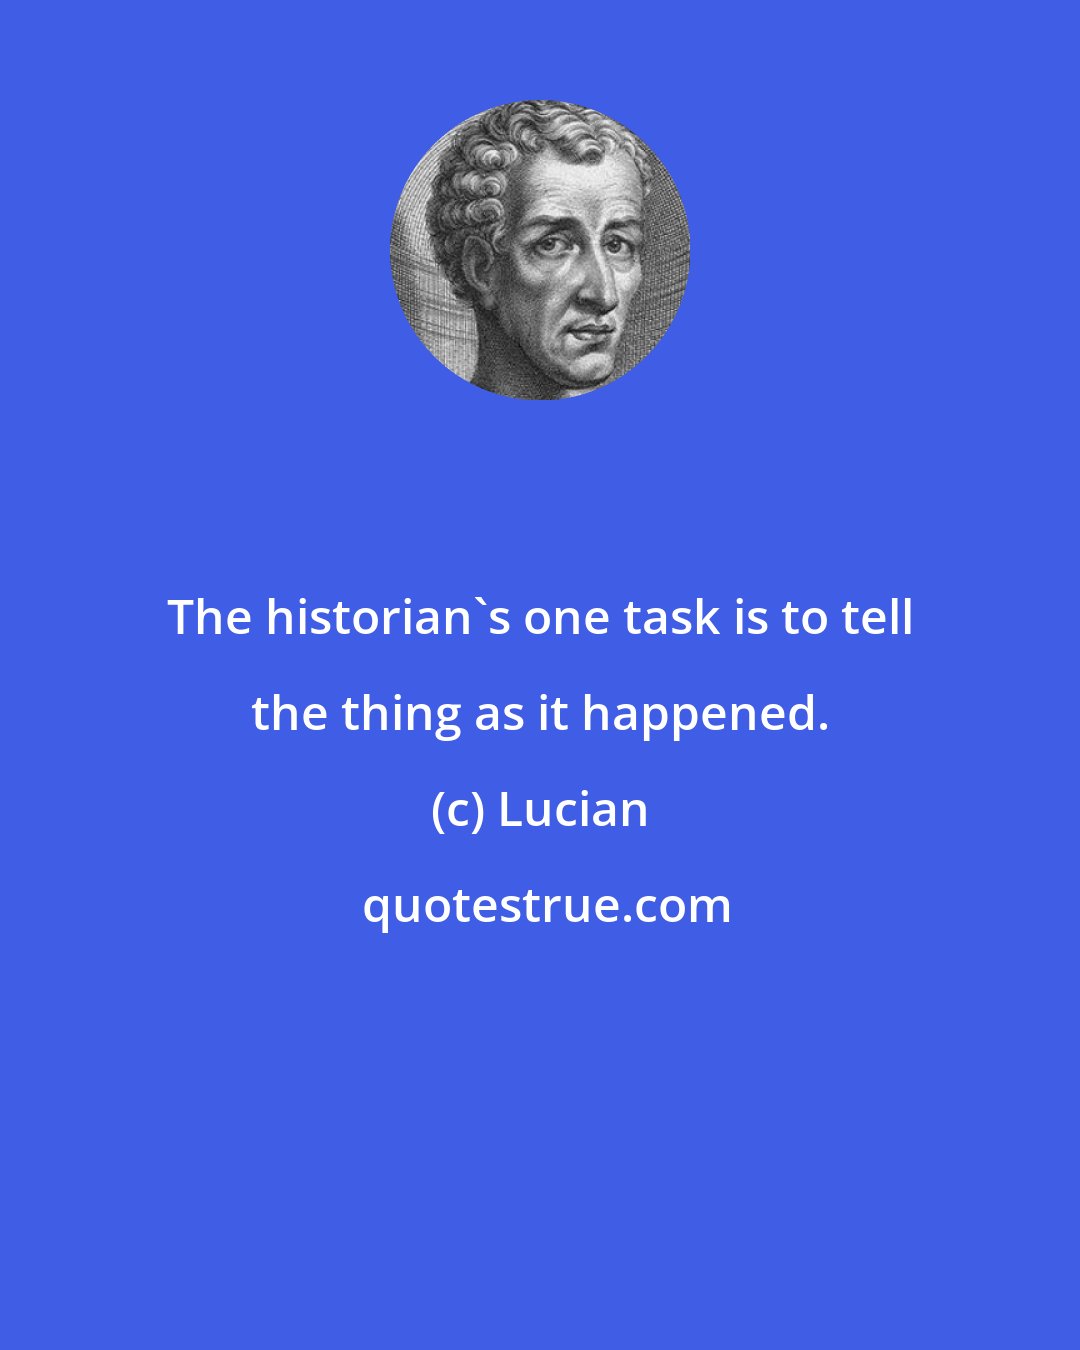 Lucian: The historian's one task is to tell the thing as it happened.